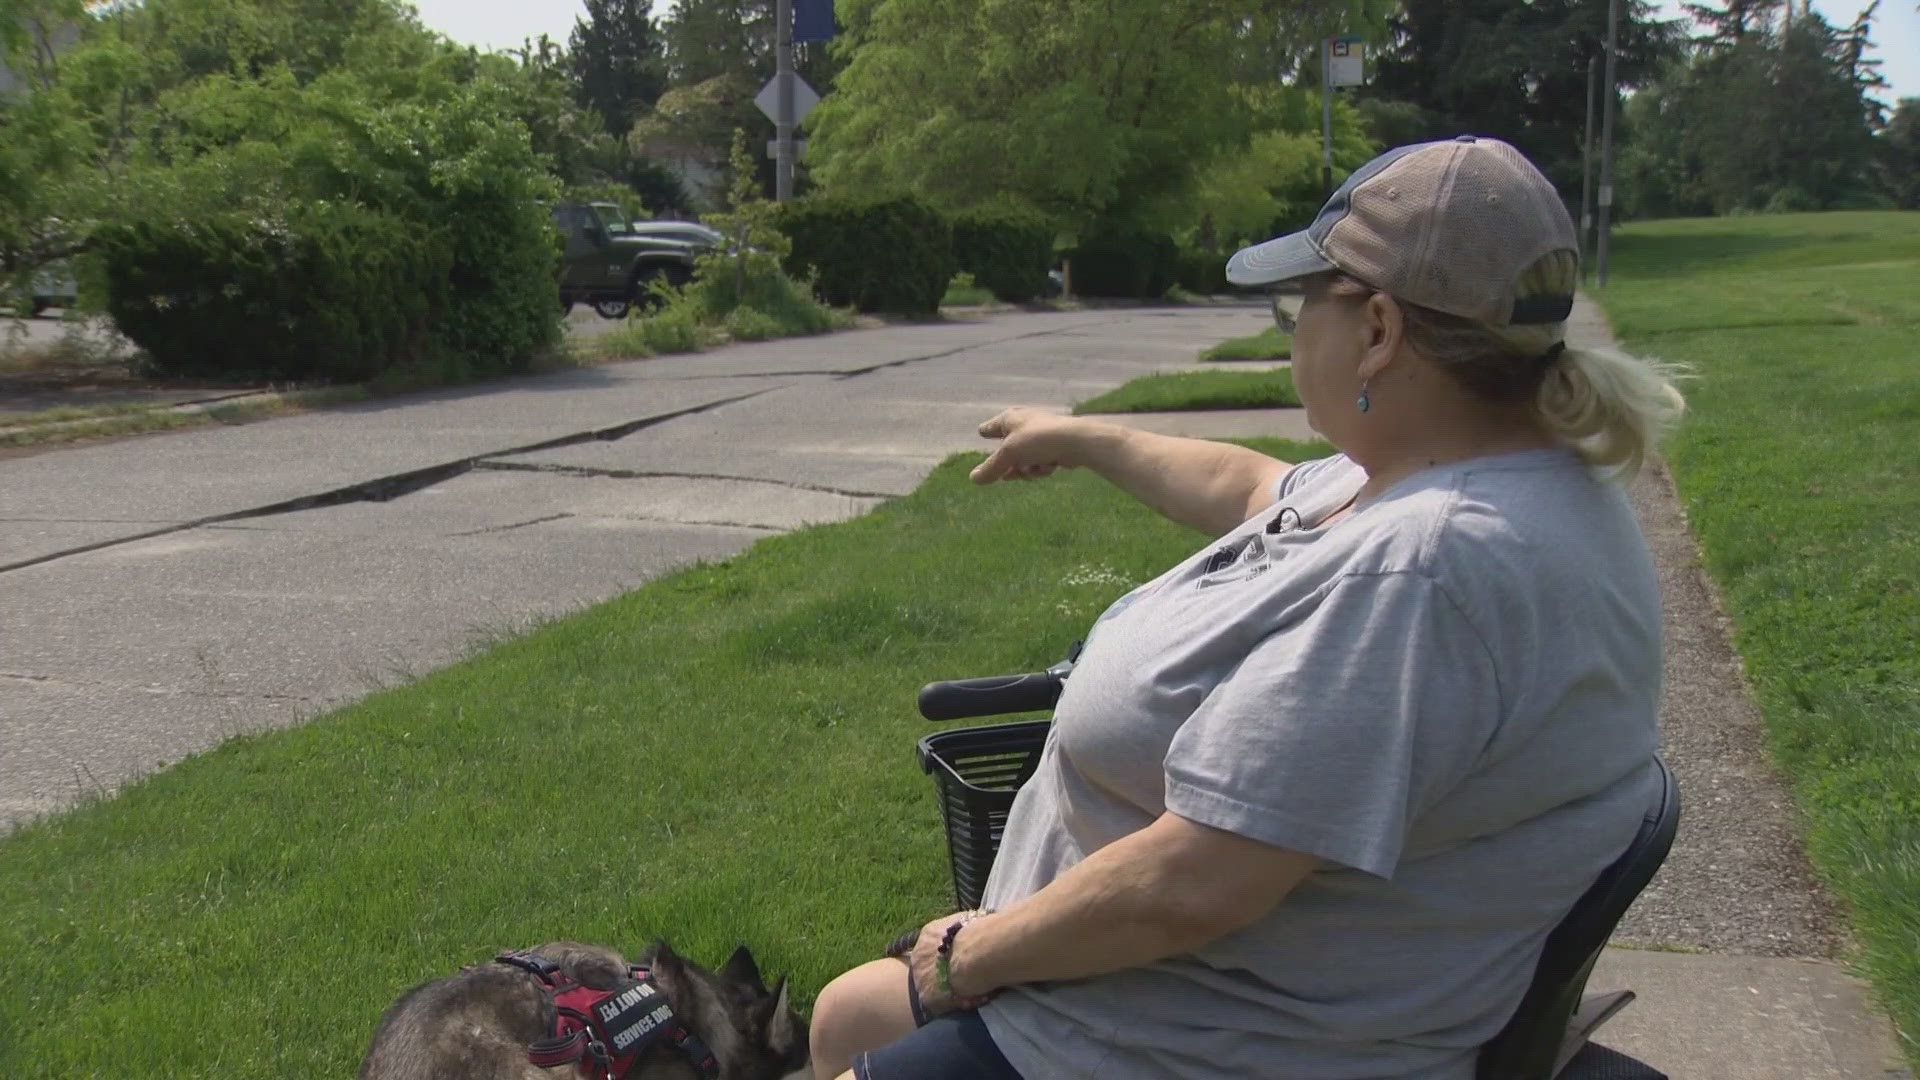 From the hole that opened up on the Highway 99 ramp to sink holes and potholes, the city responds to residents' concern.